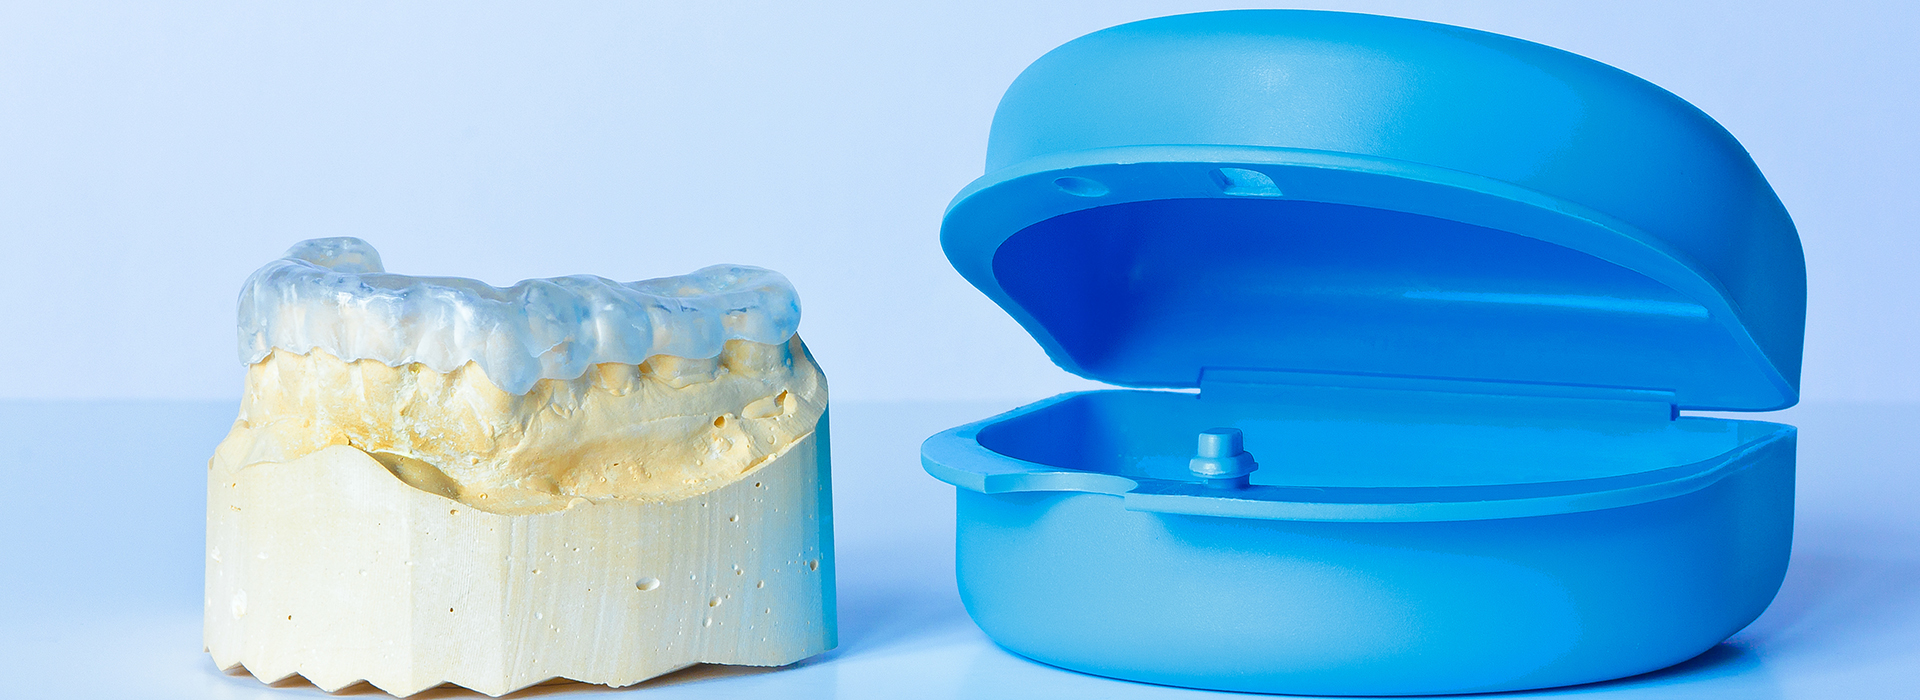 The image shows a blue dental implant next to a yellow model of a human mouth with teeth, likely for educational or sales purposes.